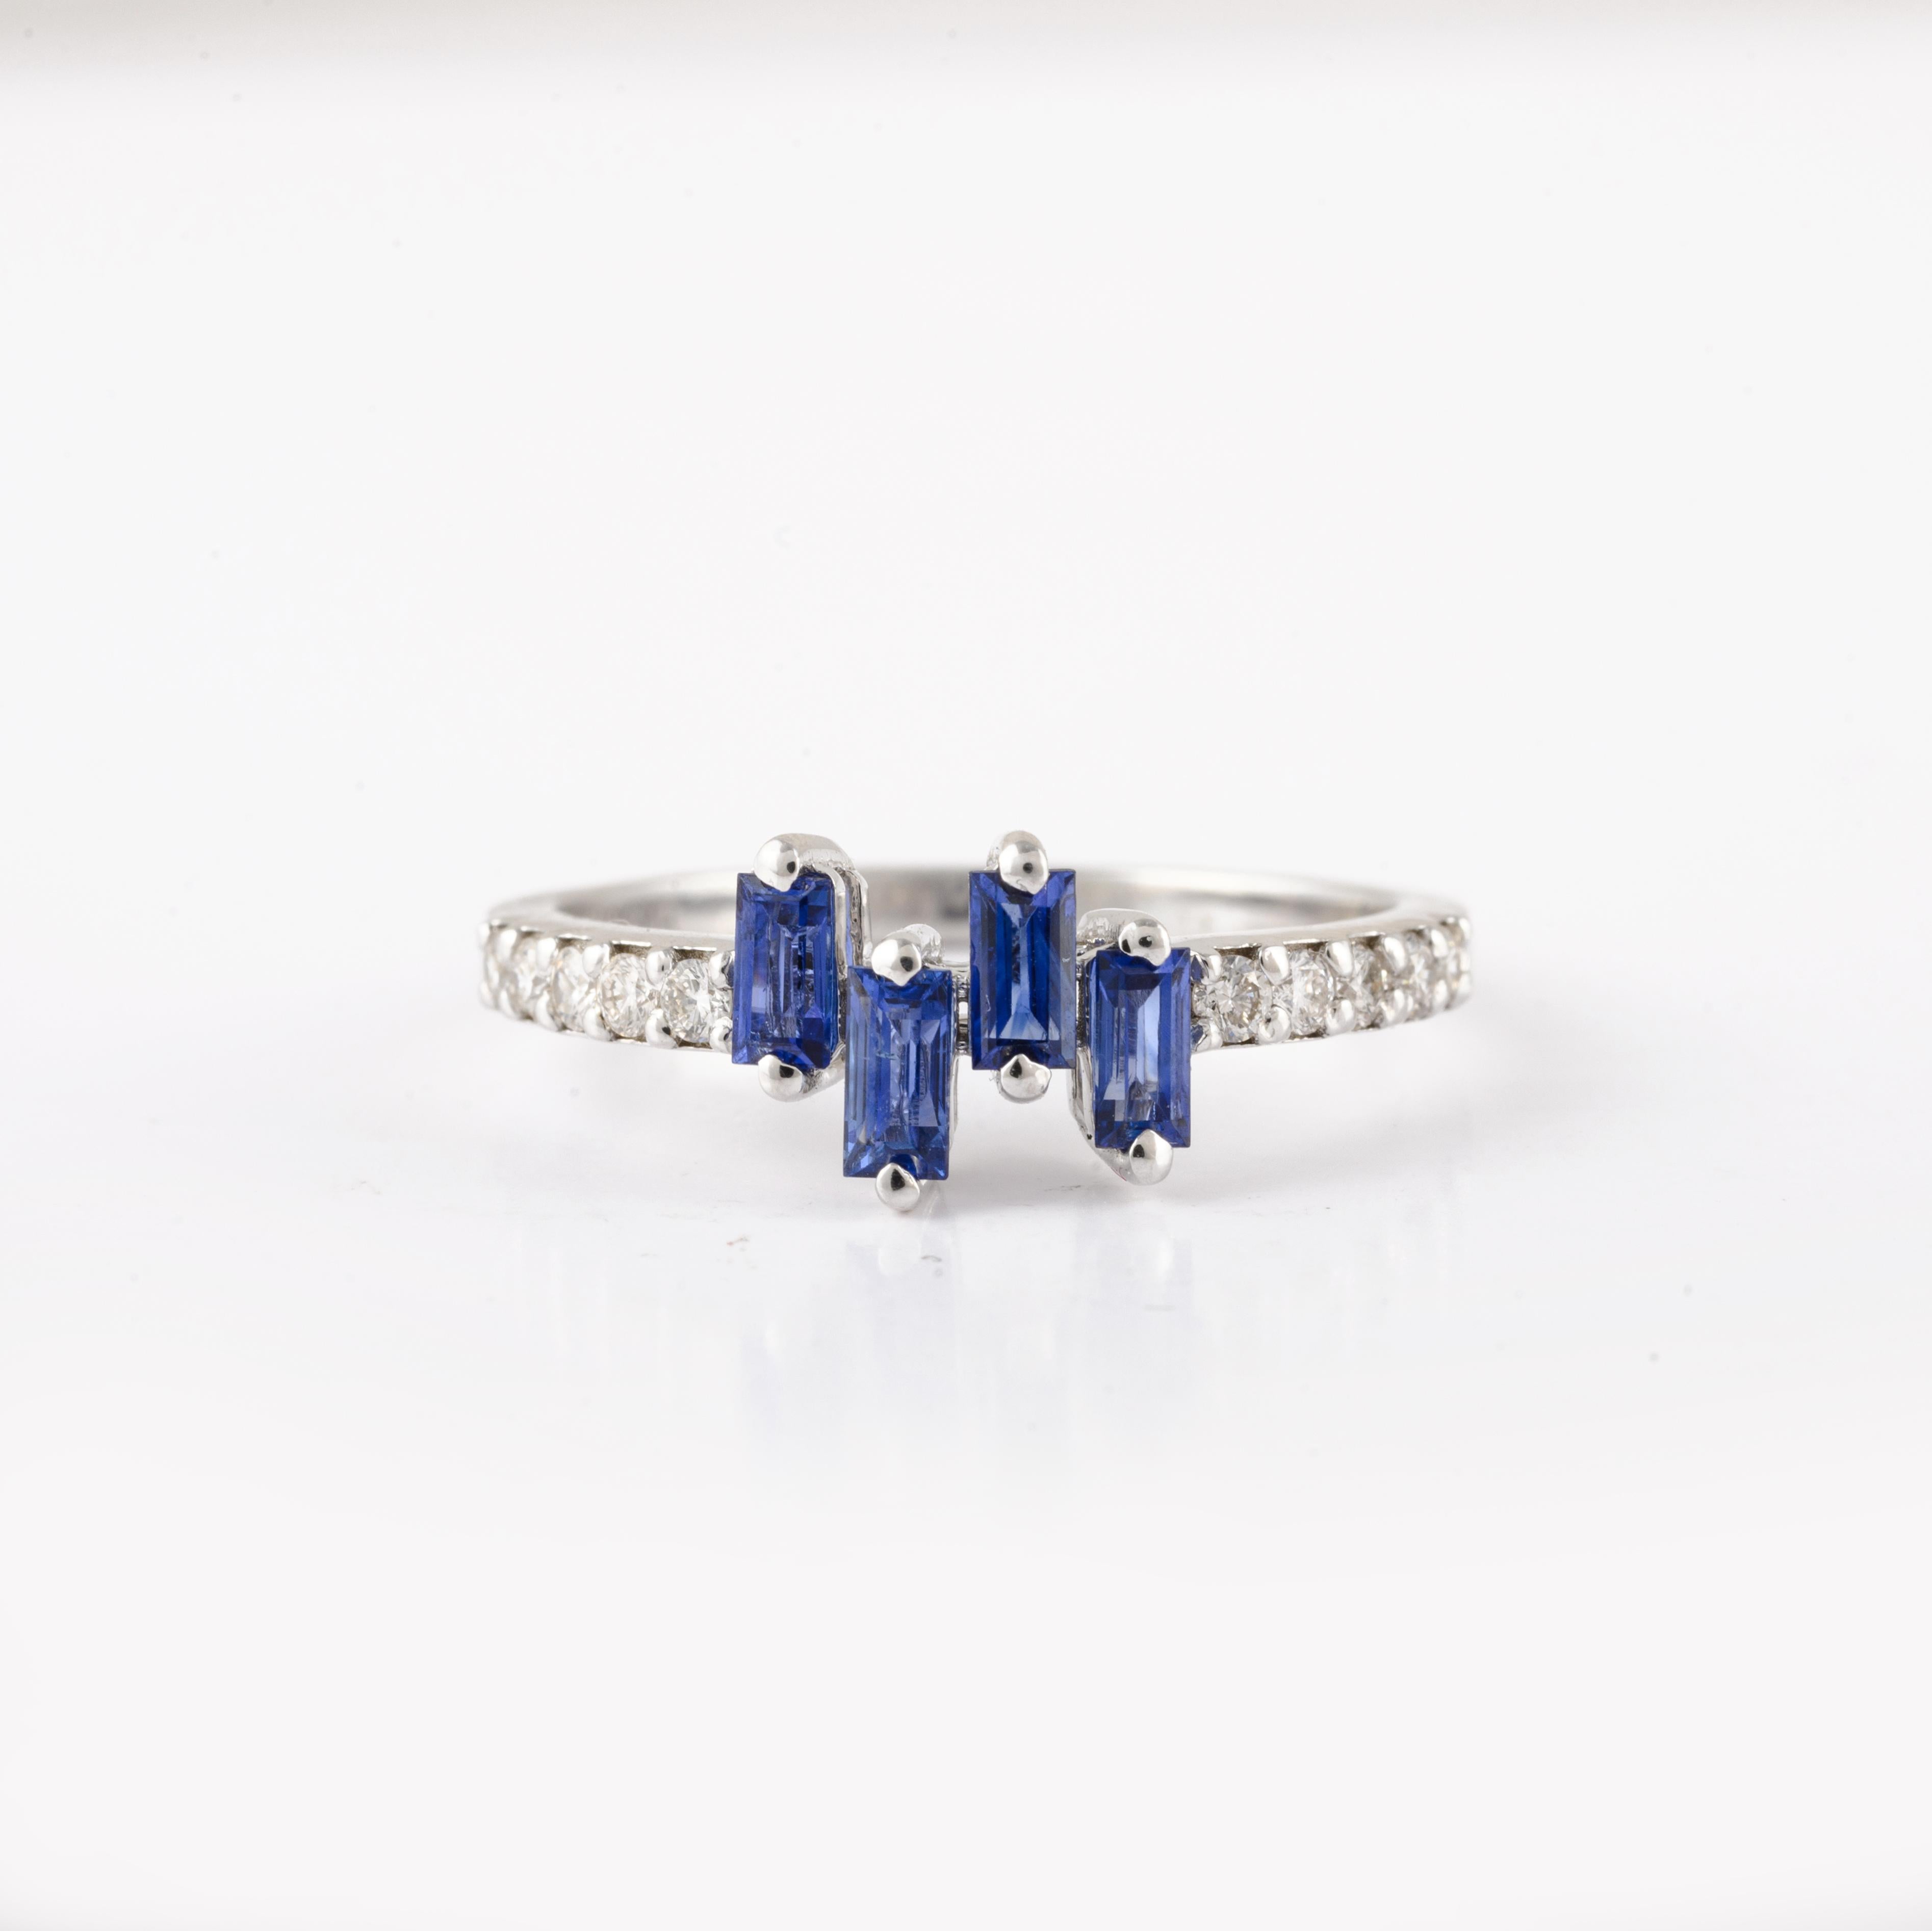 For Sale:  Minimalist Blue Sapphire Ring with Diamonds Crafted in 14kt Solid White Gold 2